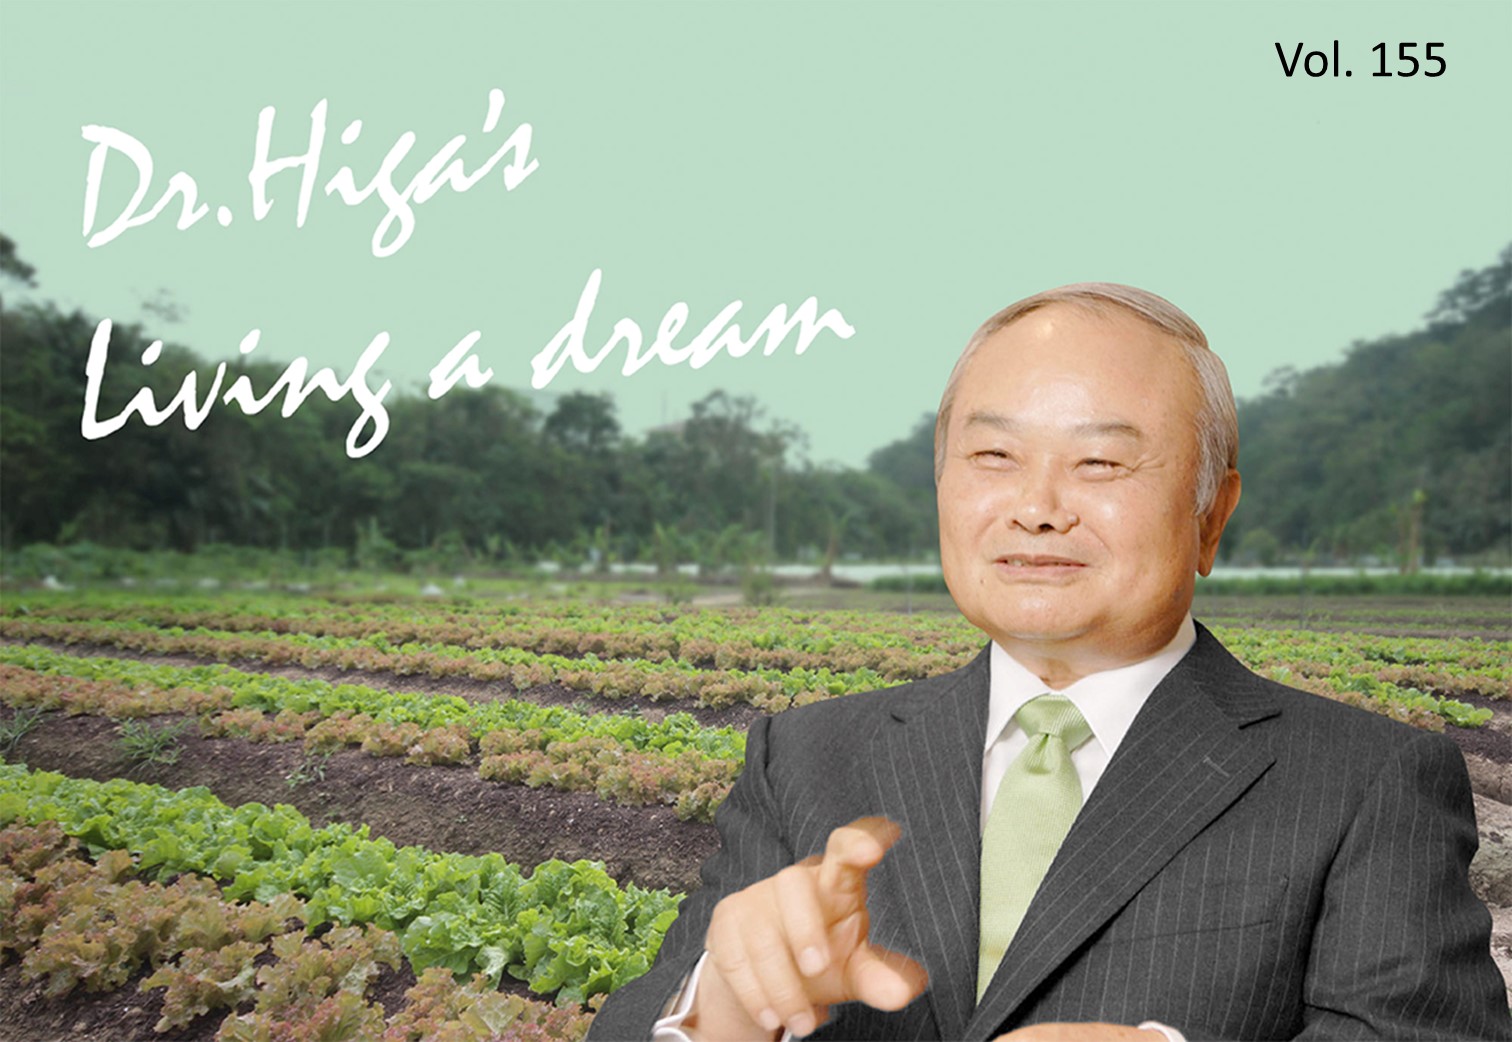 Dr. Higa's "Living a Dream": The latest article #155 is up!